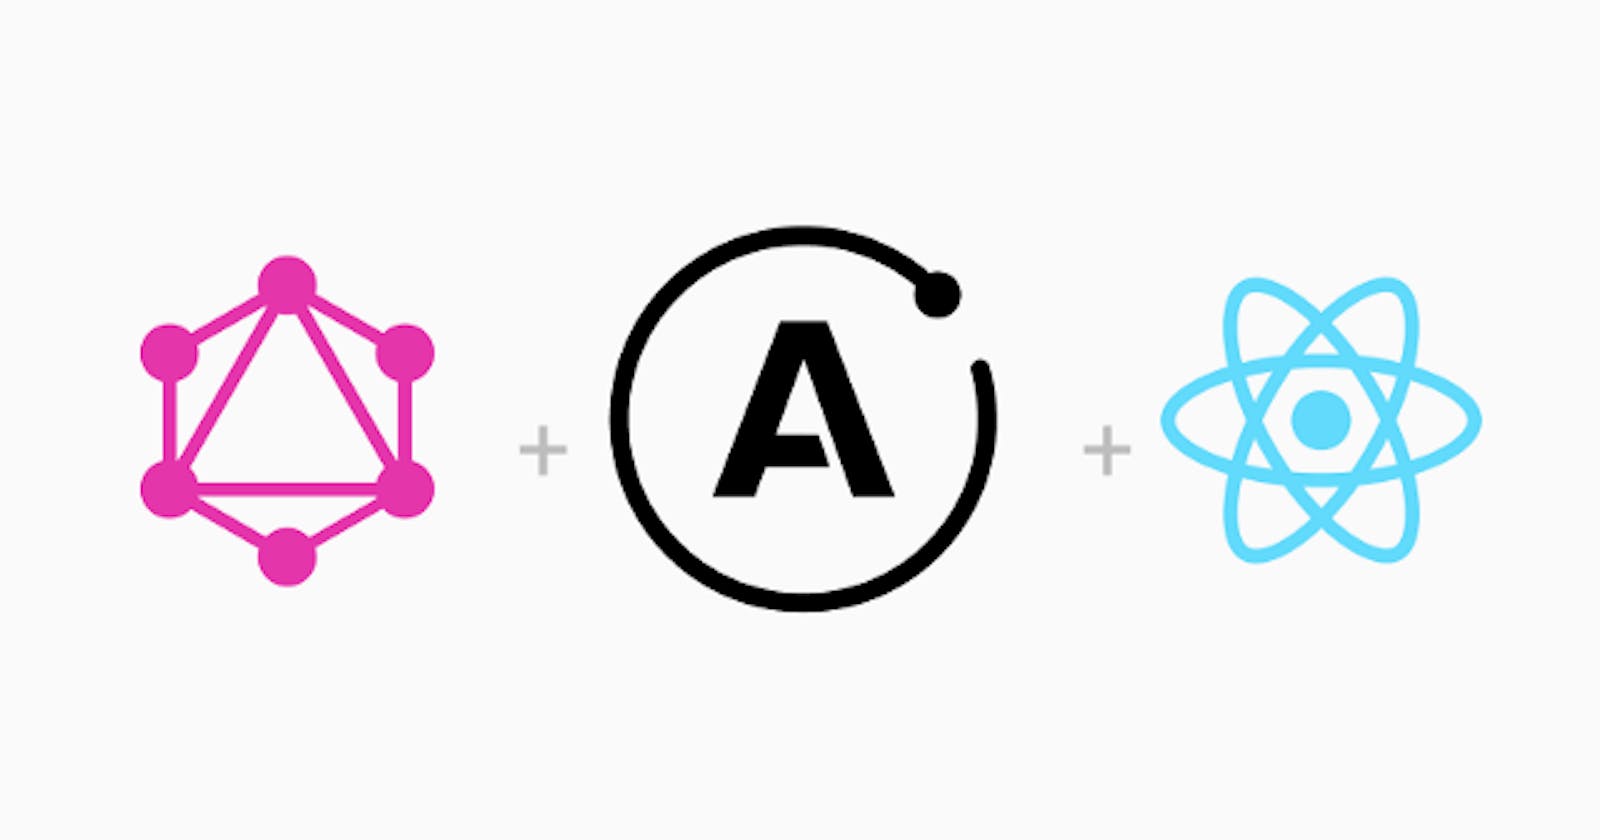 Mobile, Web Apps? Get started with React Native. API? Use Apollo GraphQL.